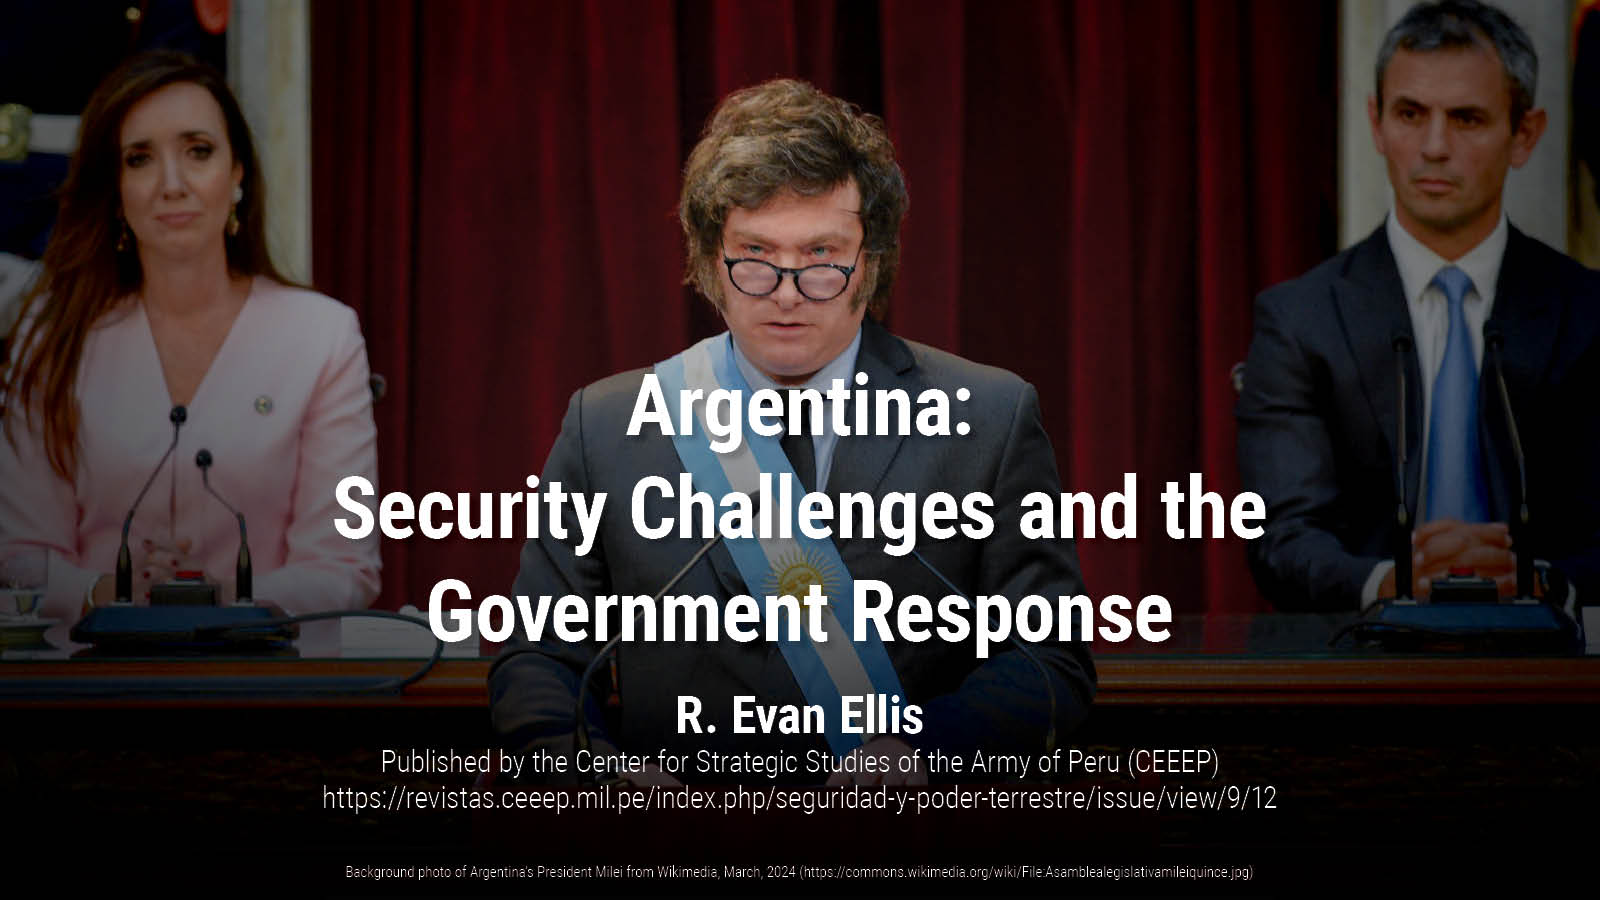 Argentina: Security Challenges and the Government Response | R. Evan Ellis